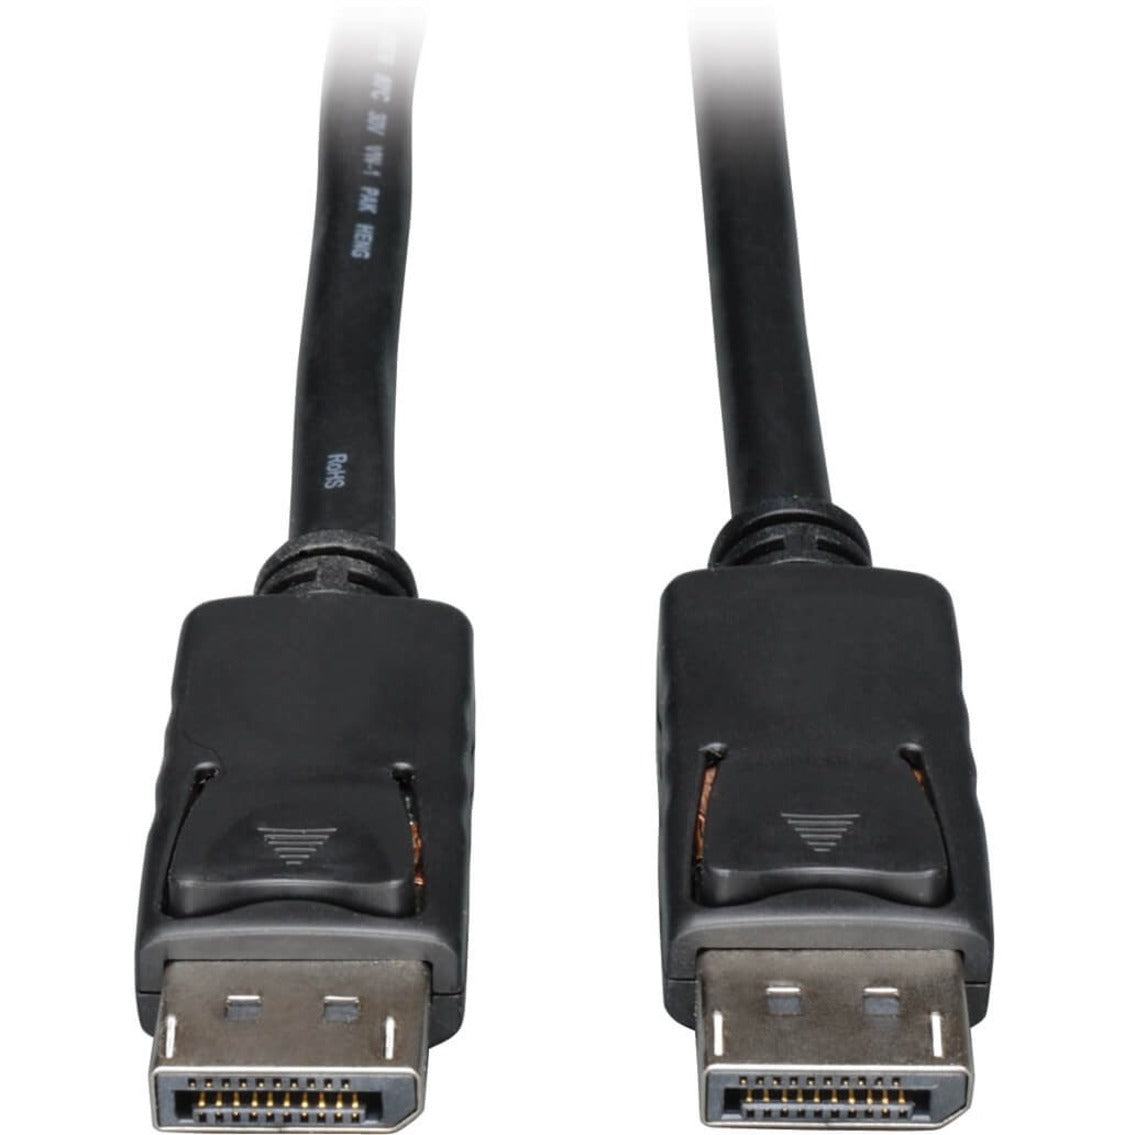 Tripp Lite P580-025 25-ft. Displayport Monitor Cable M/M, 10.8 Gbit/s Data Transfer Rate, 1920 x 1200 Supported Resolution